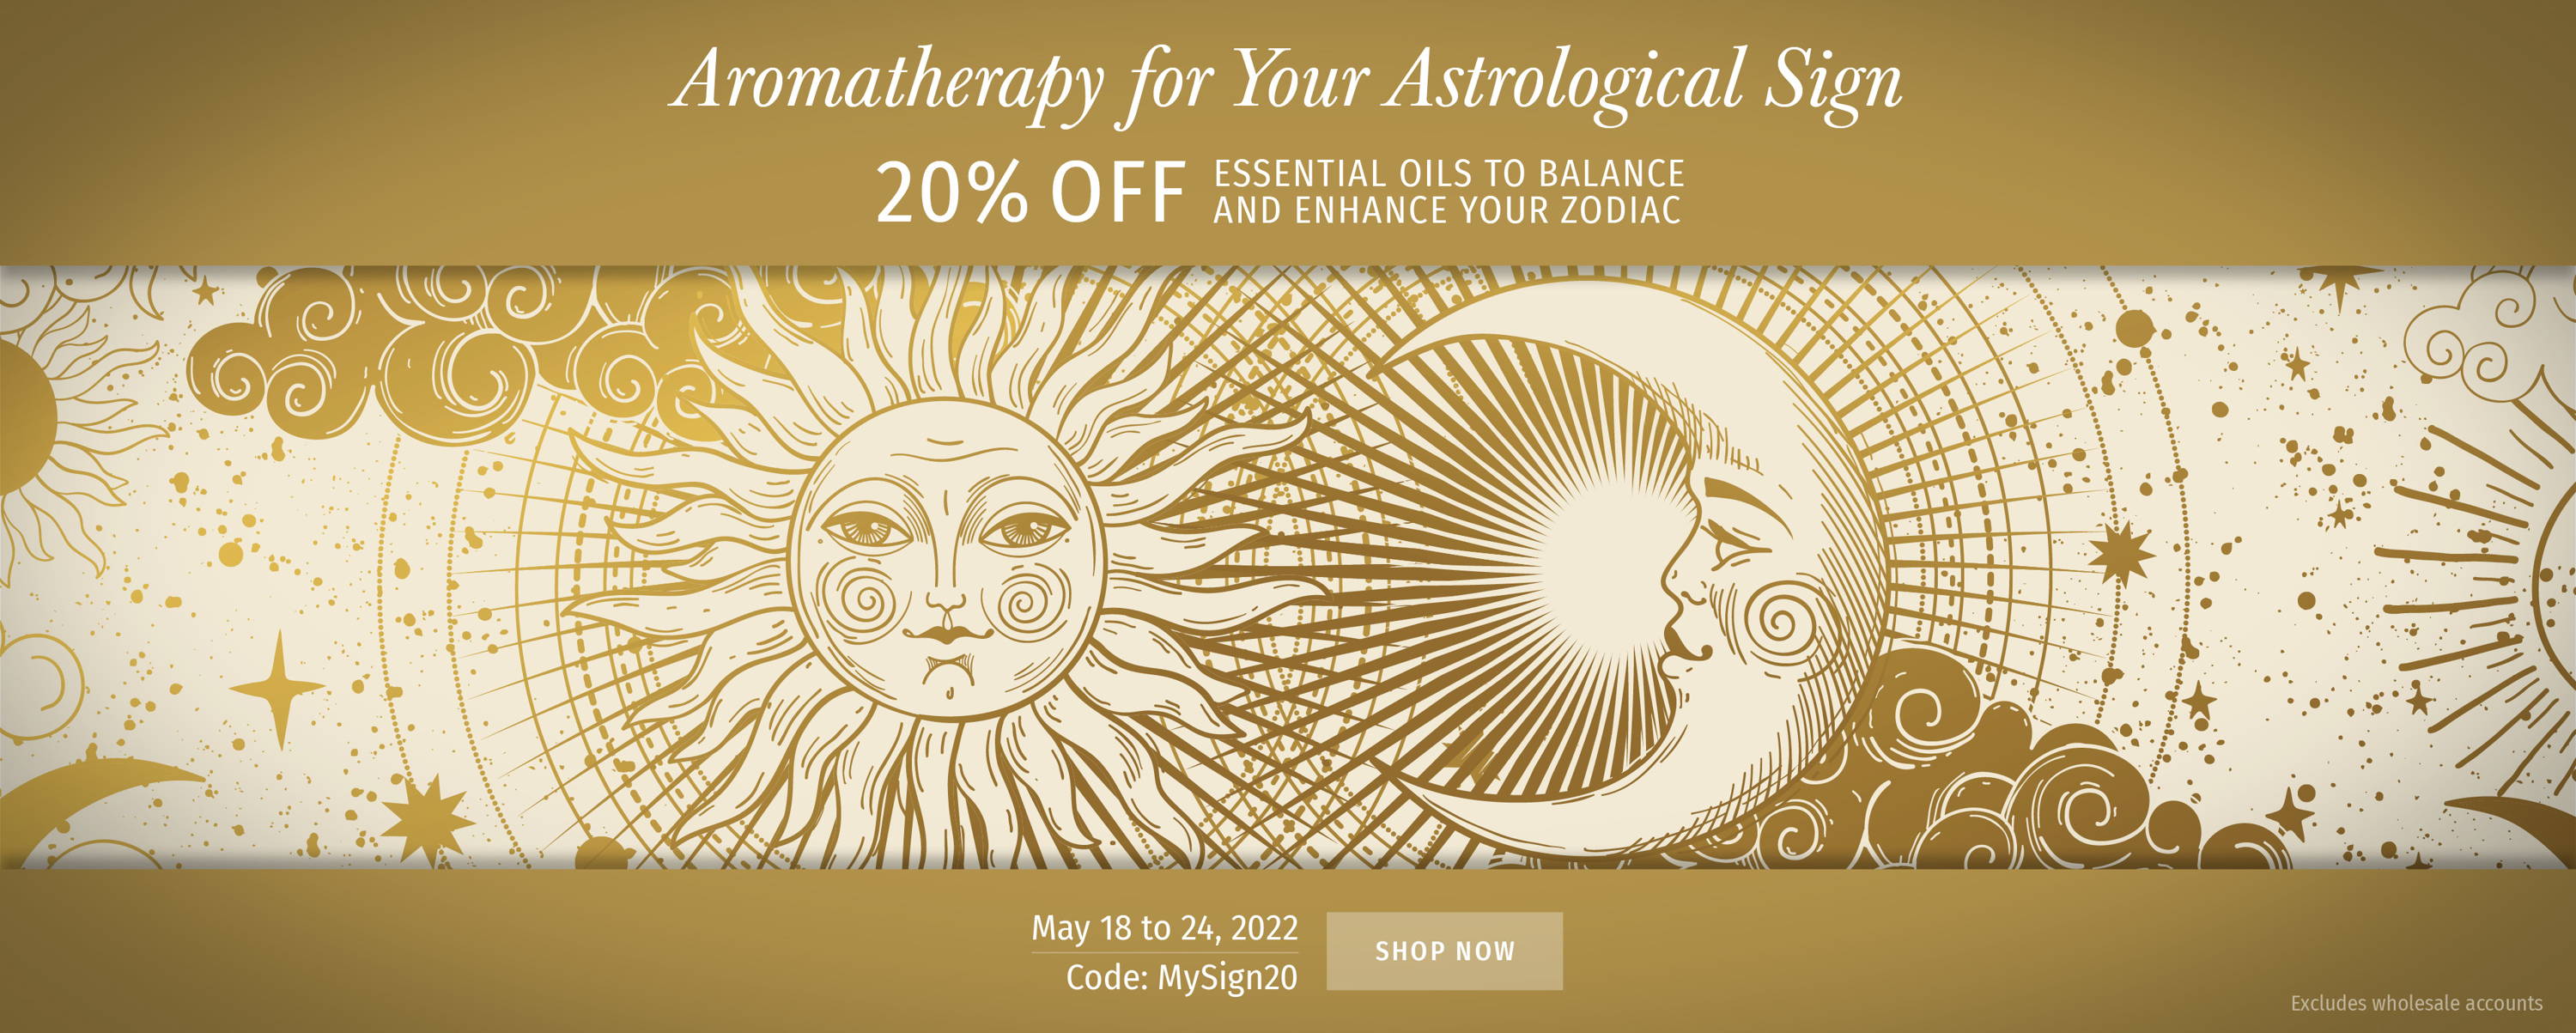 gold boho moon stars astrology text: aromatherapy for your astrological sign 20% off select products May 18 to 24 2022 with code MySign20